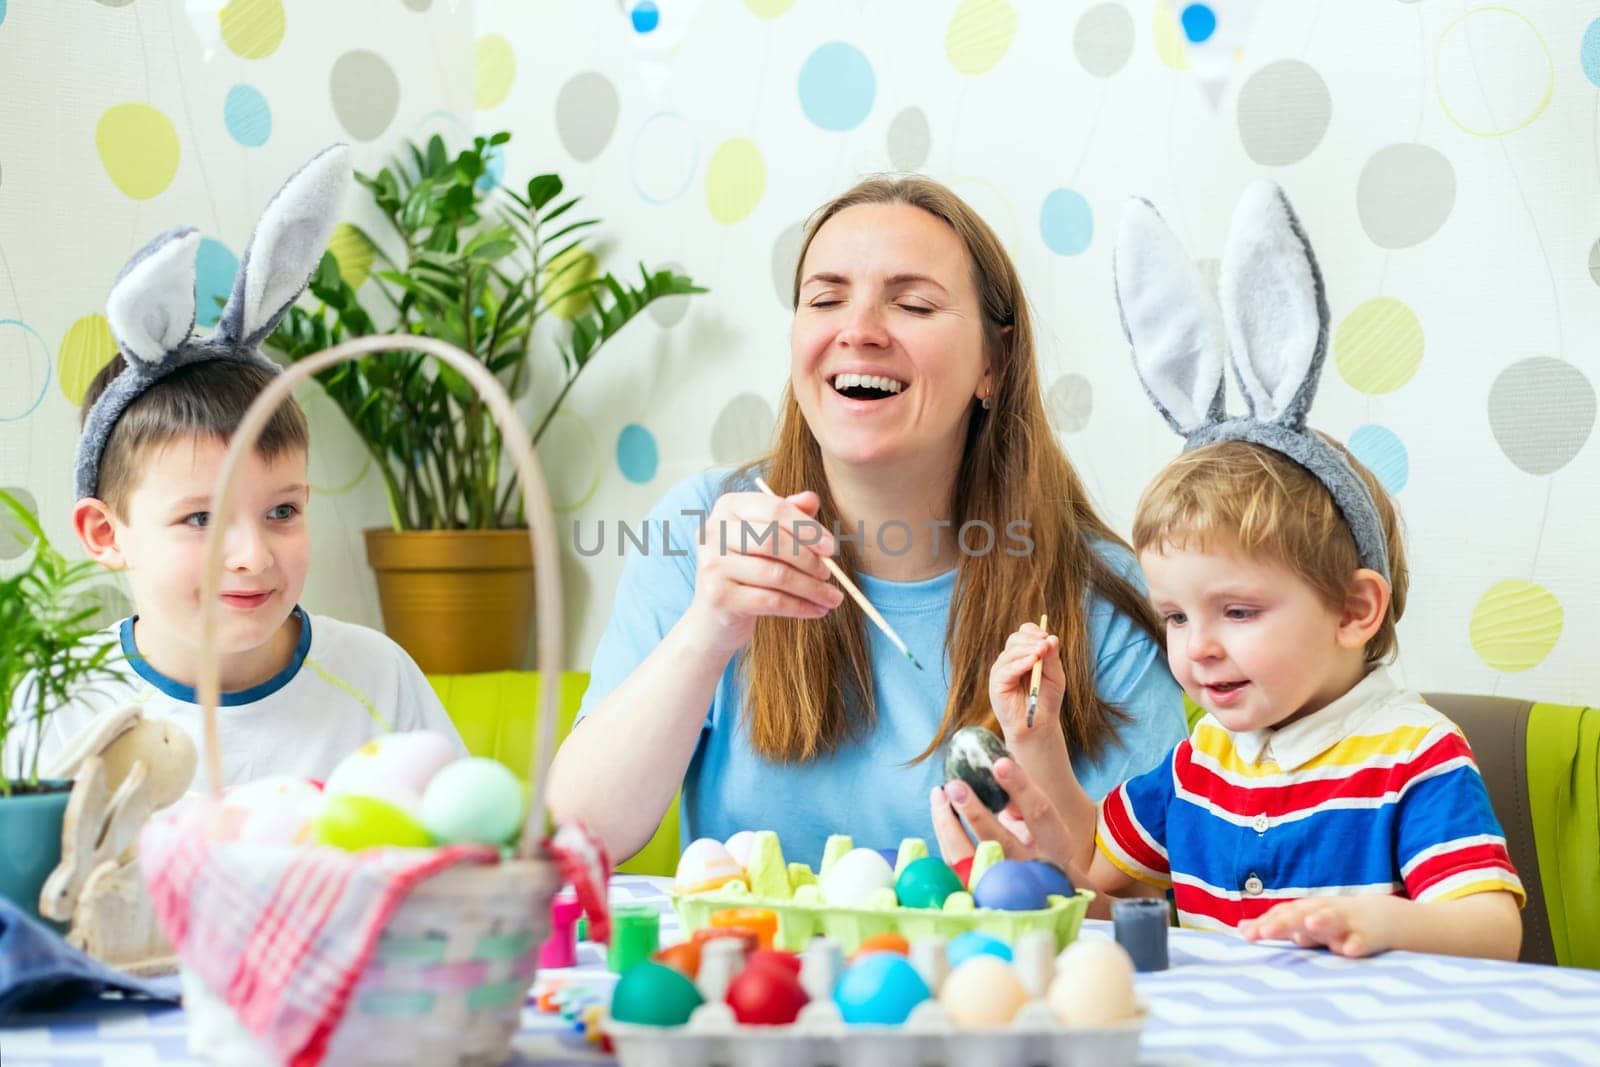 Happy Easter. A mother and her children painting Easter eggs. Happy family getting ready for Easter. Cute boys wearing bunny ears on Easter day